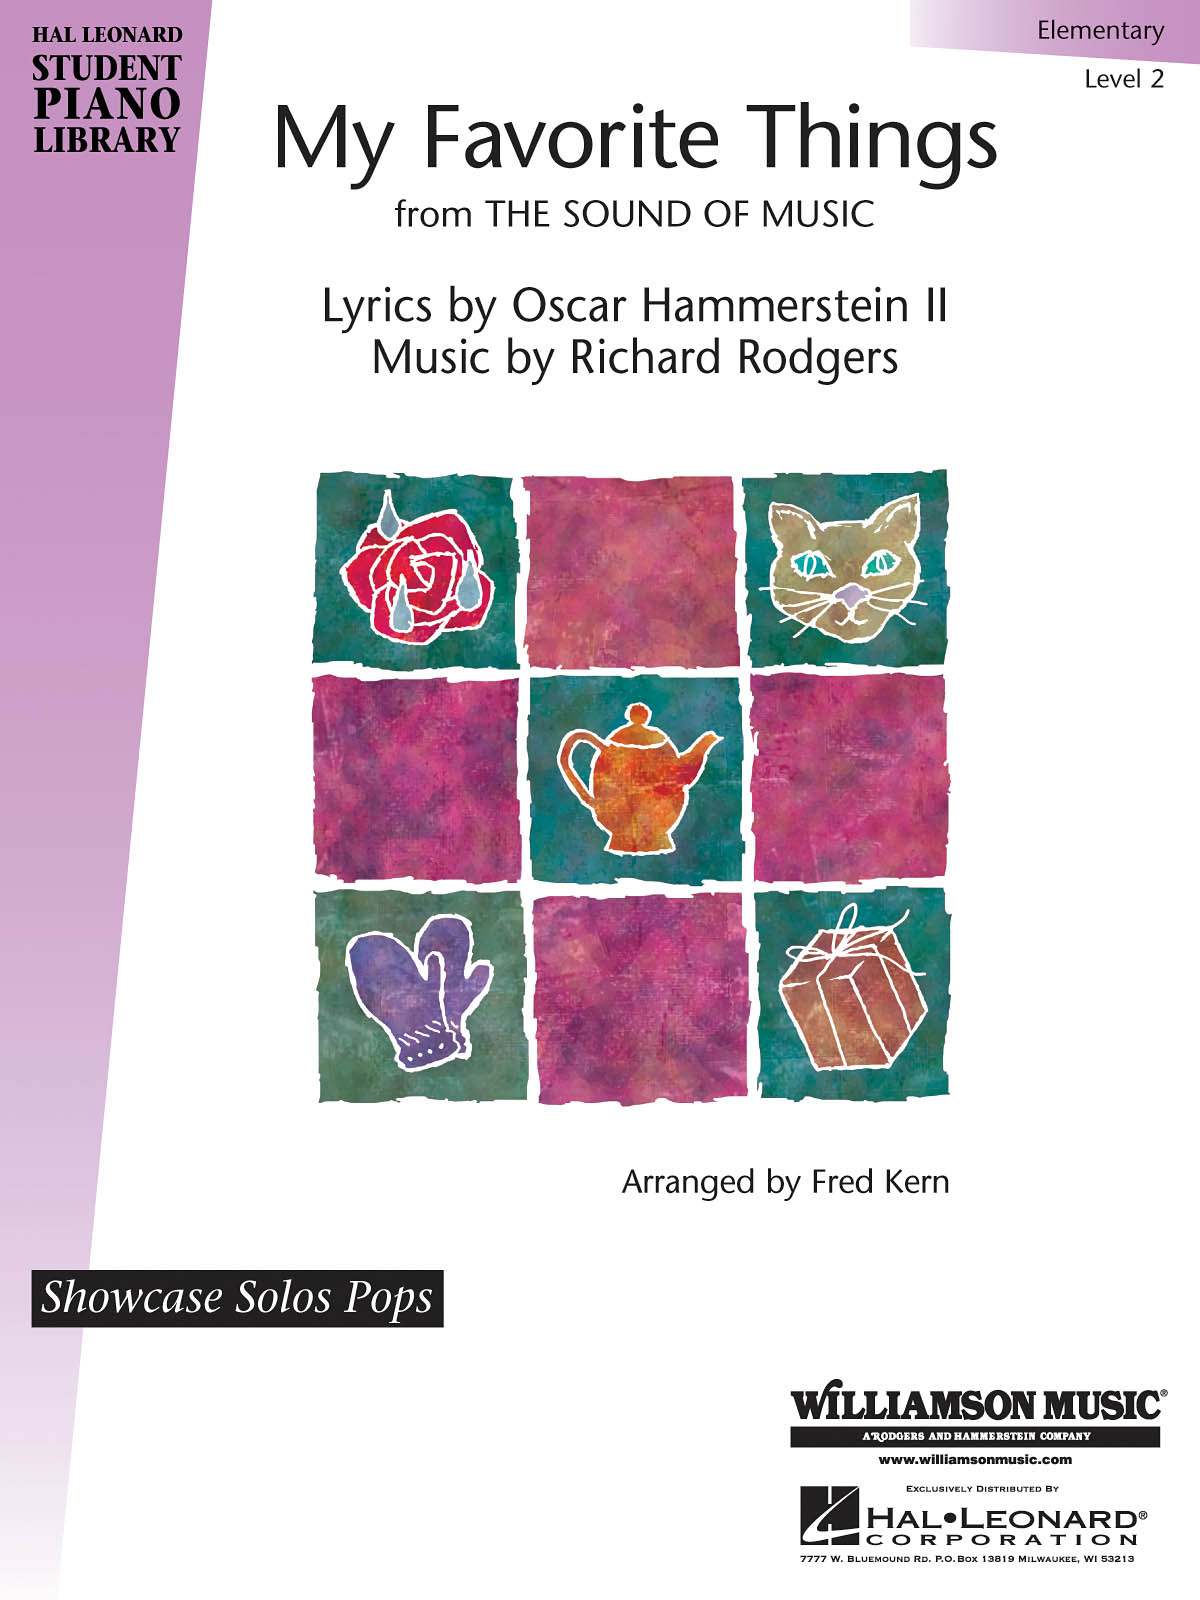 My Favorite Things(Hal Leonard Student Piano Library Showcase Solos Pops Level 2 Elementary))